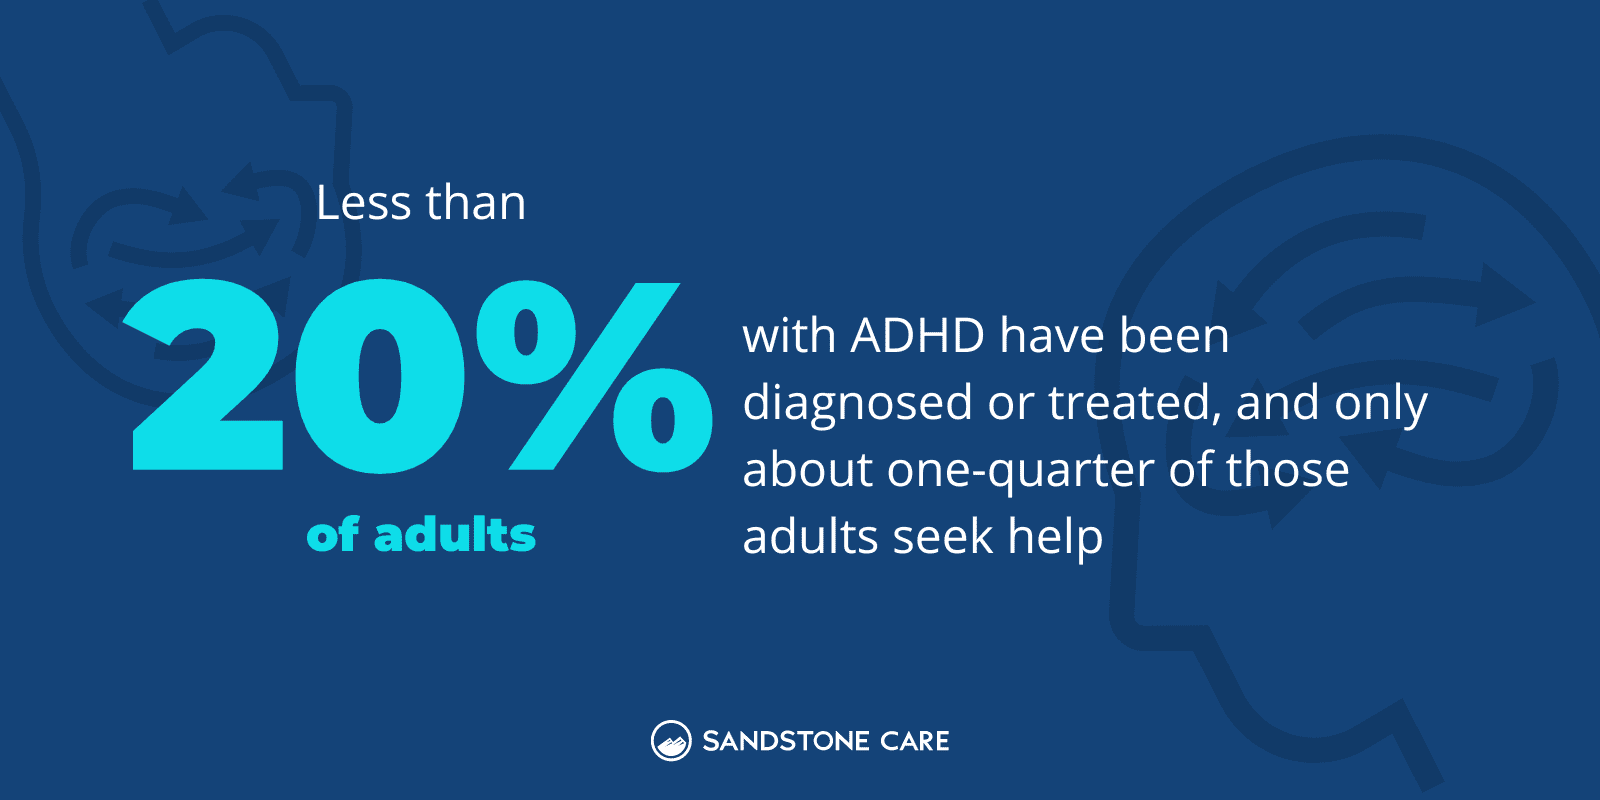 ADHD infographic showing Less than 20% of adults with ADHD have been diagnosed or treated